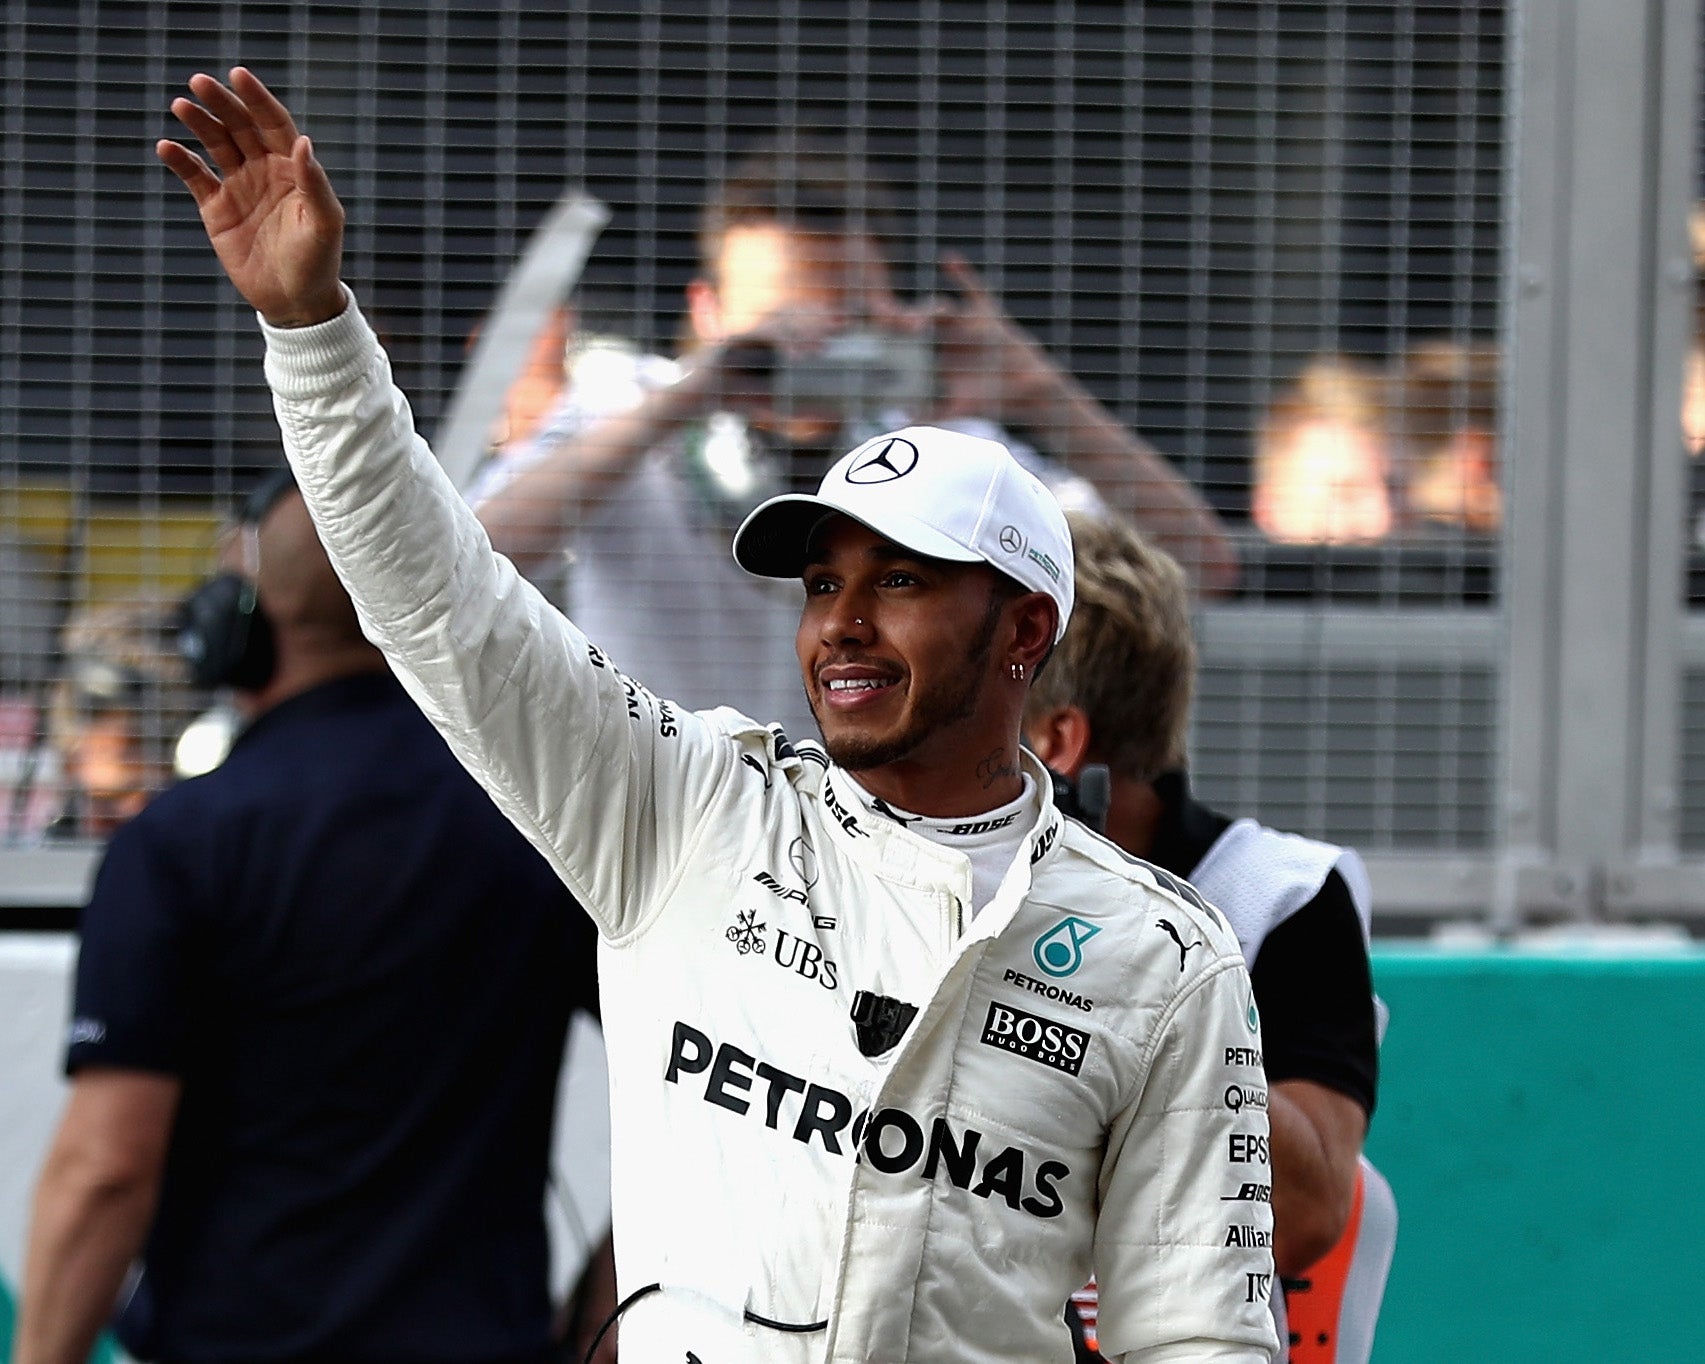 Hamilton is favourite going into the race